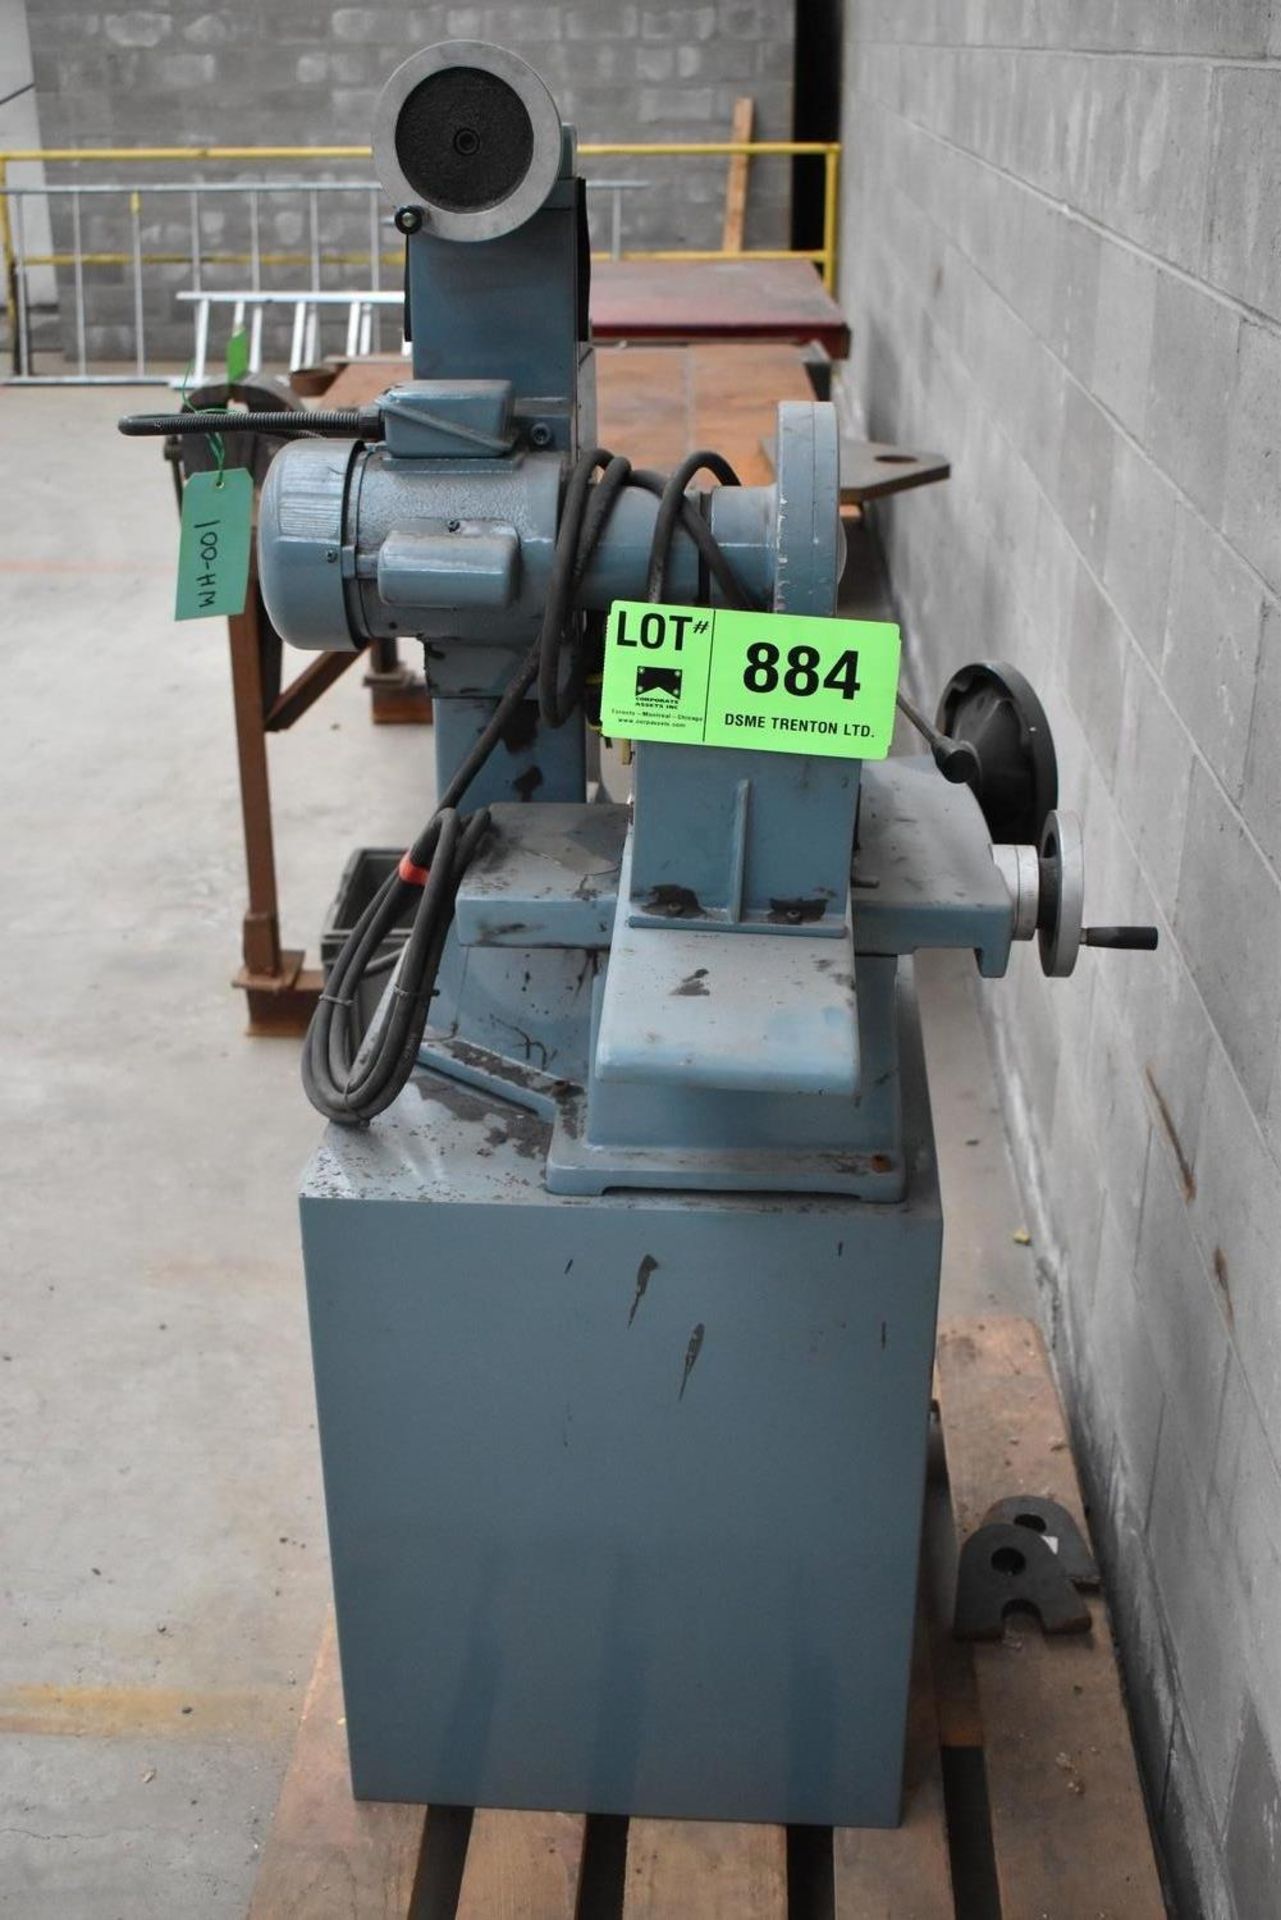 KING (2012) 6"X12" CONVENTIONAL SURFACE GRINDER, S/N 11989